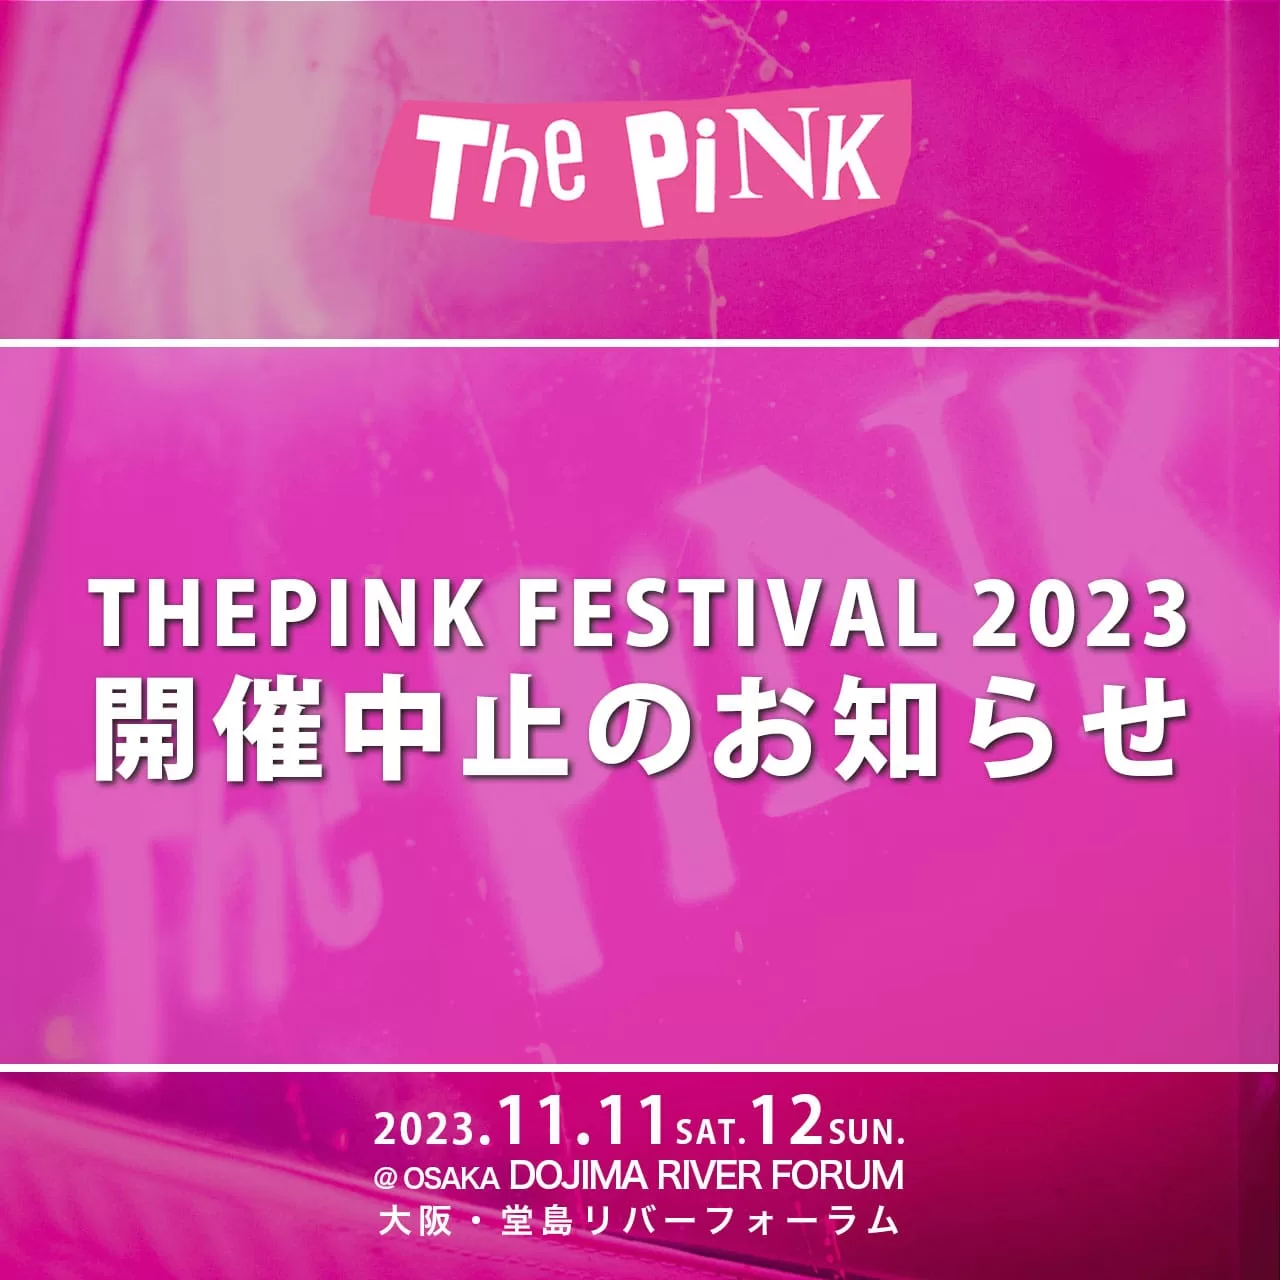 THEPINK FESTIVAL 2023 11月11日(土)、12日(日) 堂島リバーフォーラム 